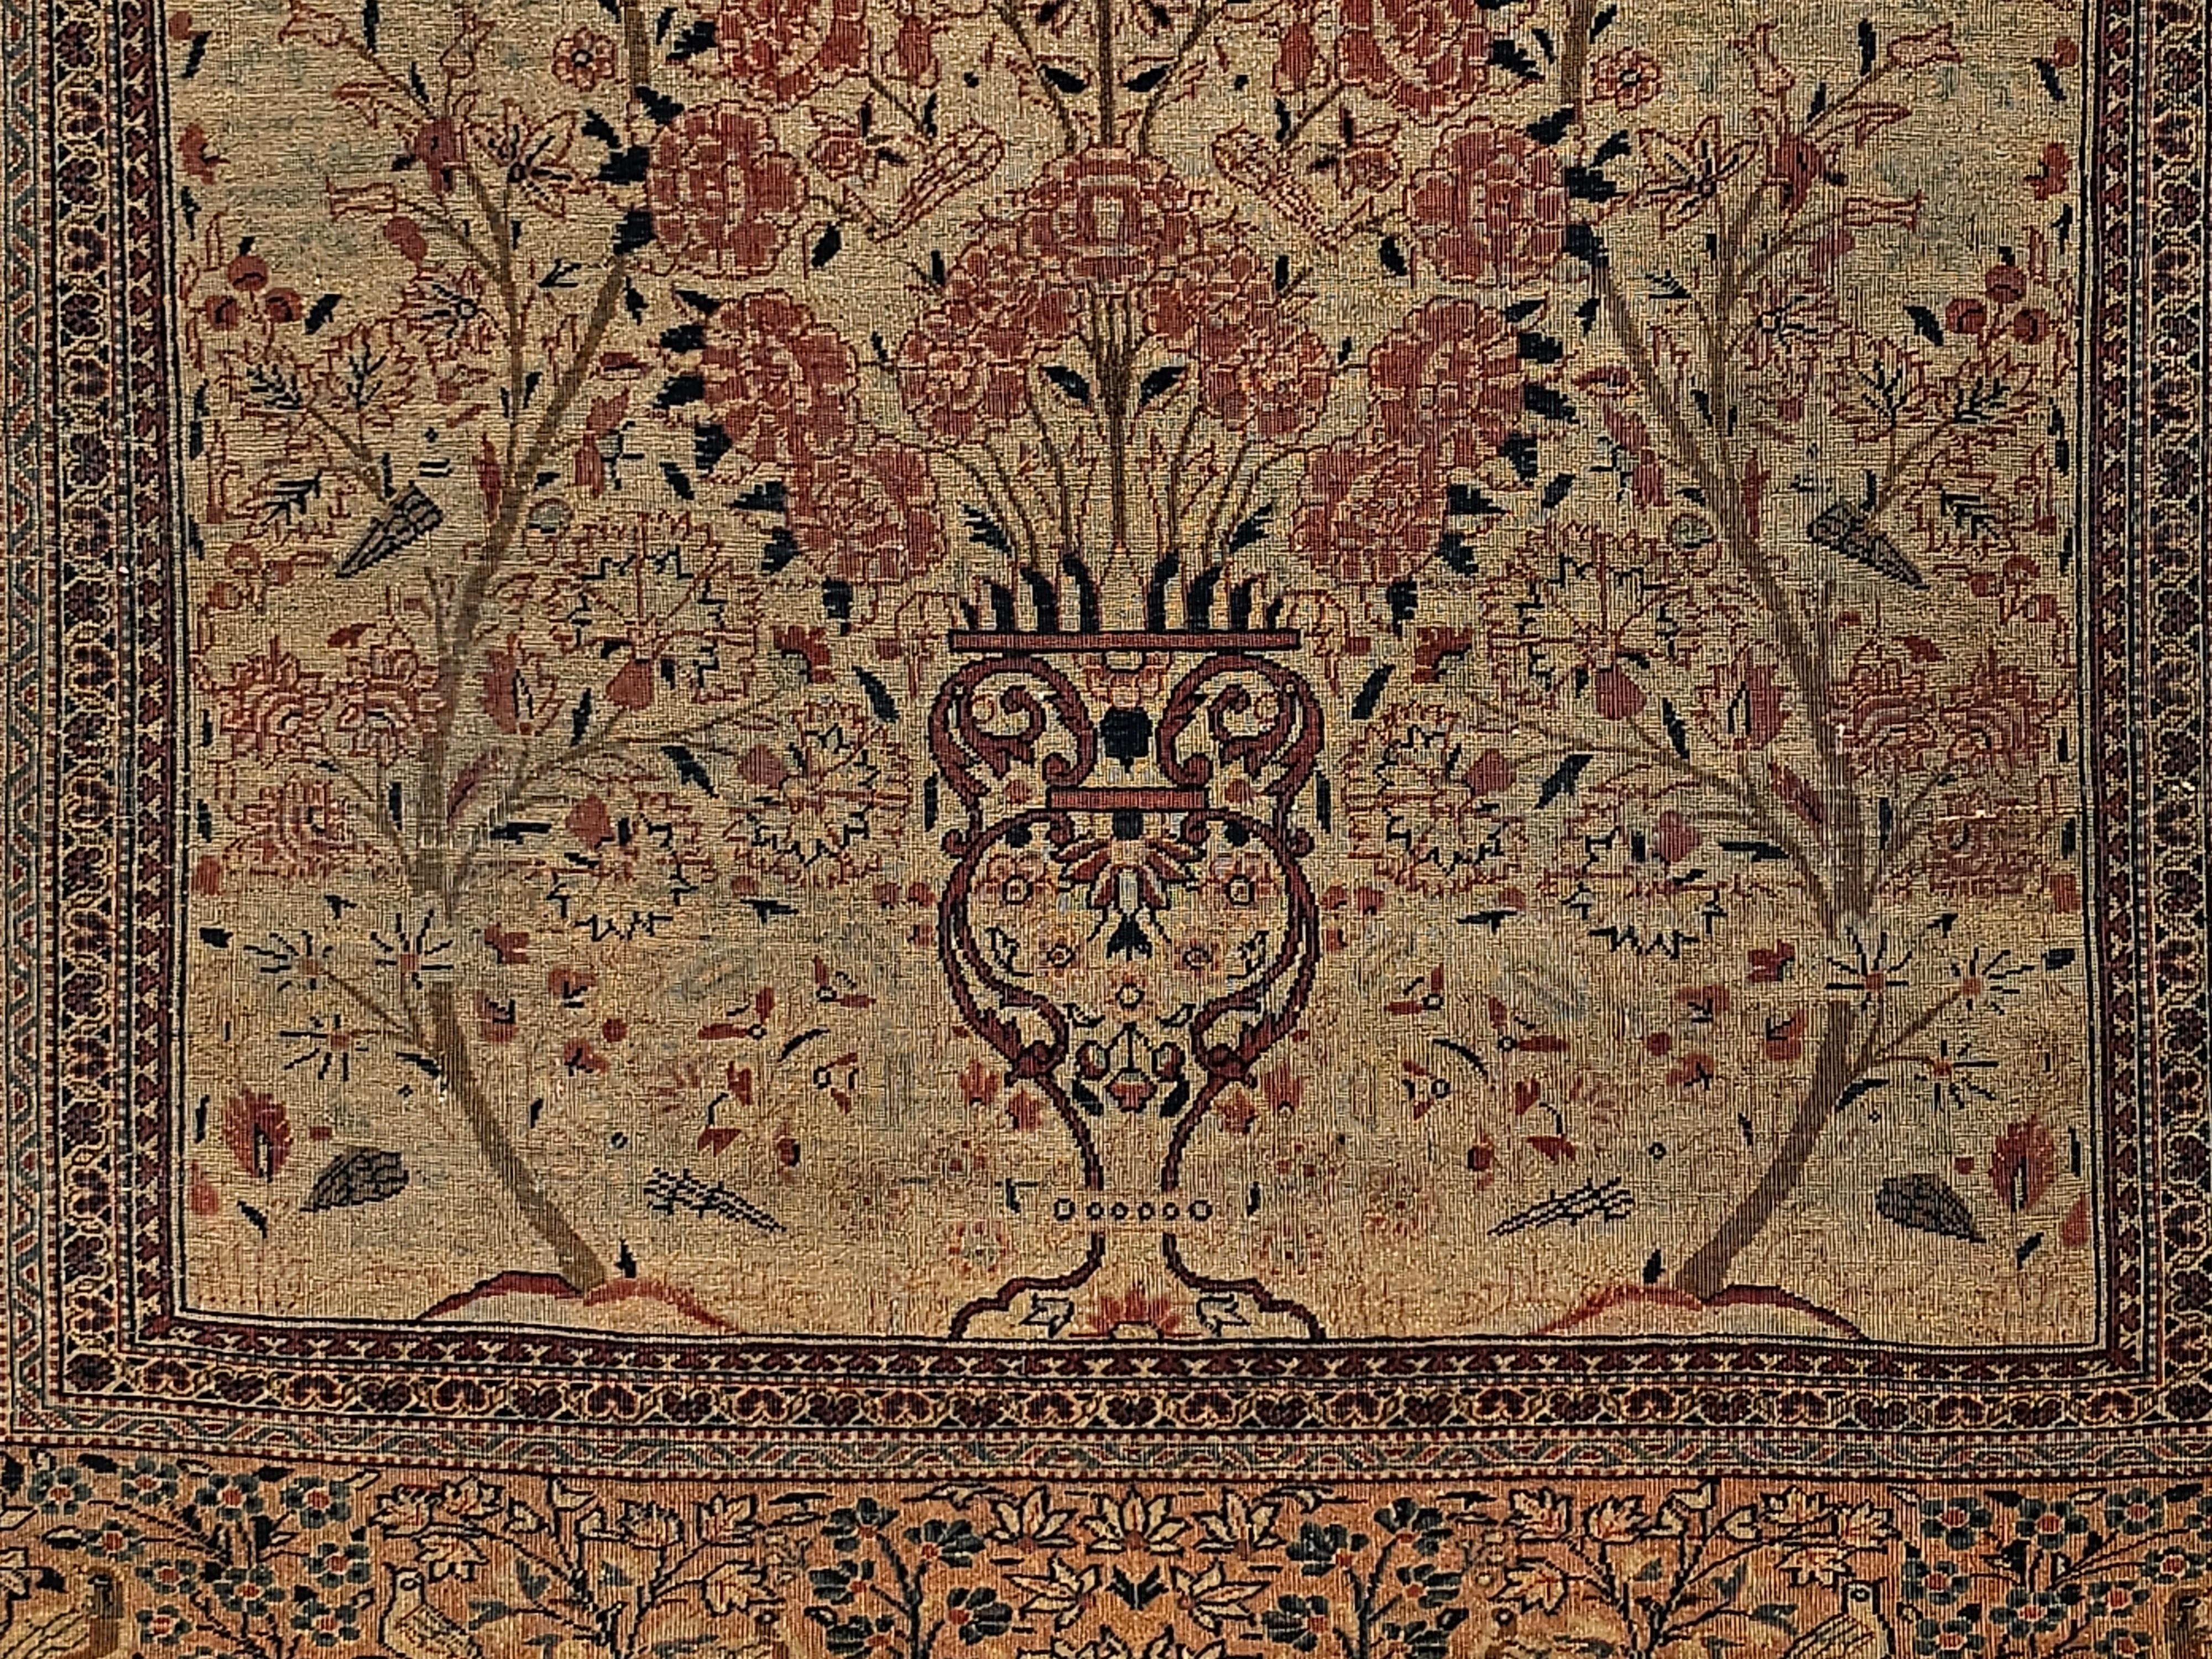 Wool 19th Century Persian Kashan Vase “Tree of Life” Rug in Ivory, Brick Red, Navy For Sale